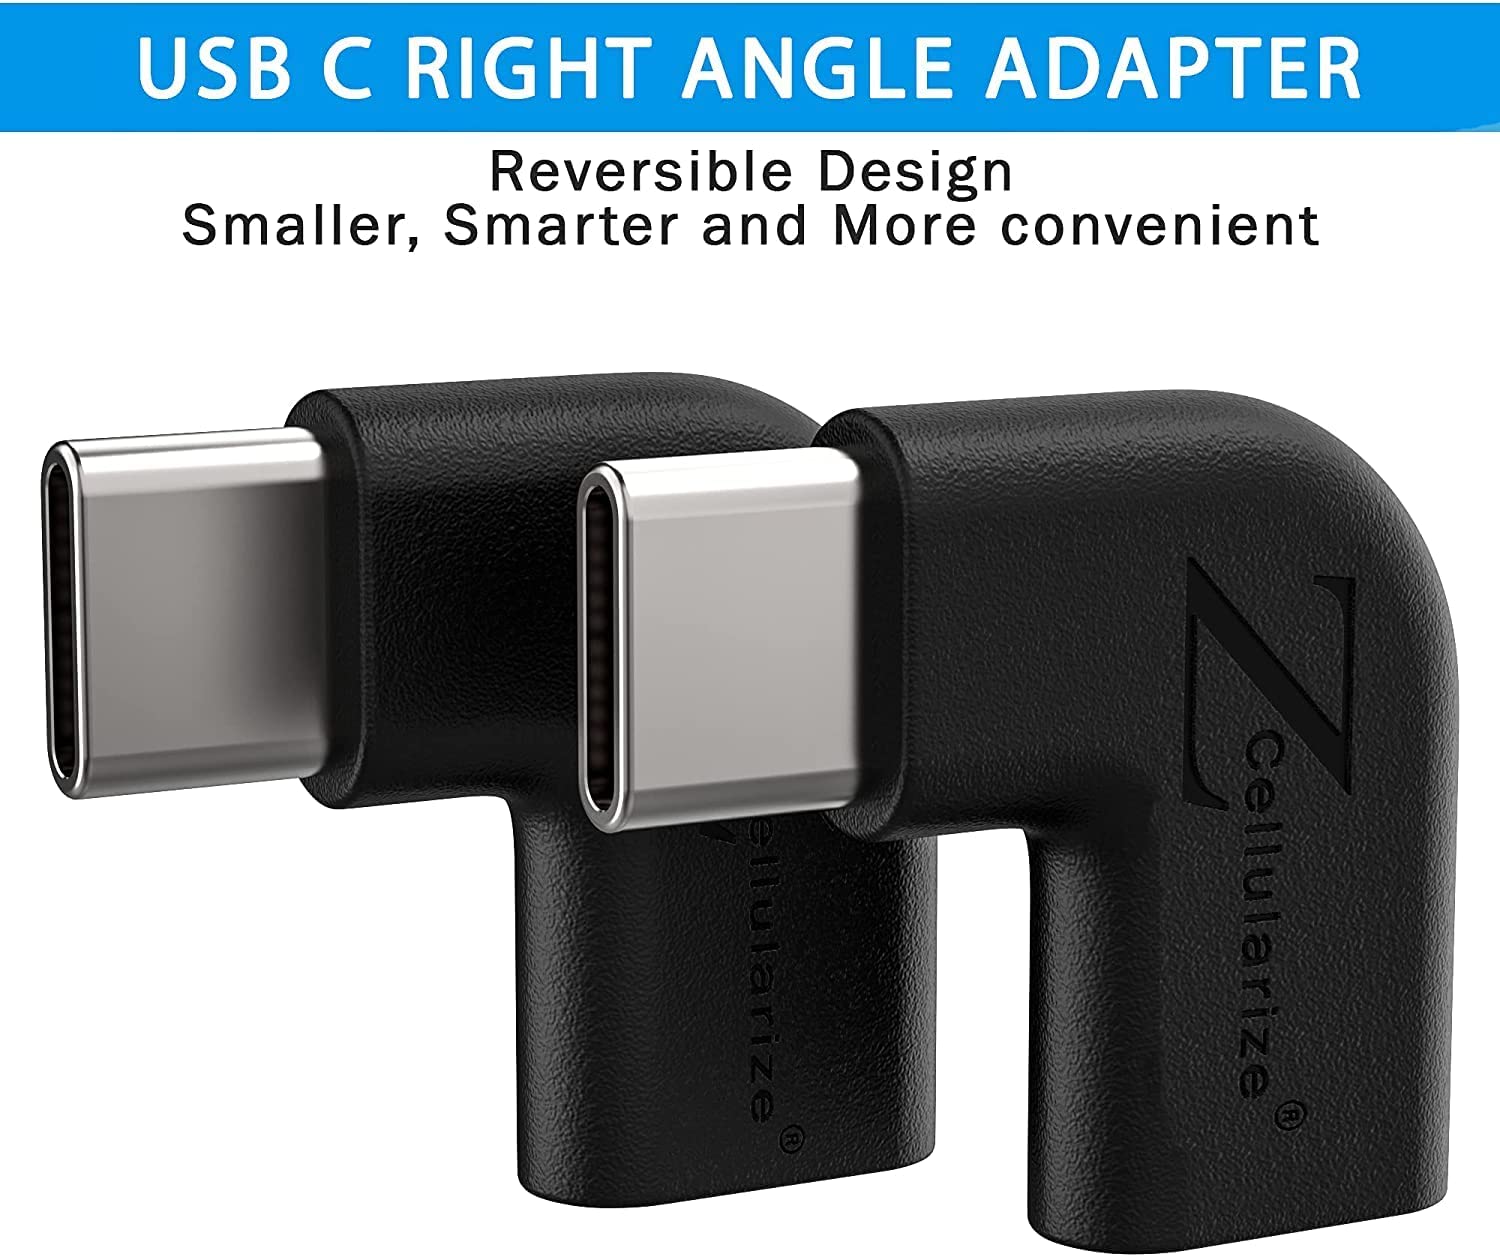 90 Degree USB C Female to USB C 3.1 Male Extension Adapter,Compatible MacBook Pro Surface Book 2,Chromebook,Pixelbook,Samsung Galaxy 10 S9 S8+ Note 9 8（Left-Right） 2-Pack USB C Right Angle Adapter 